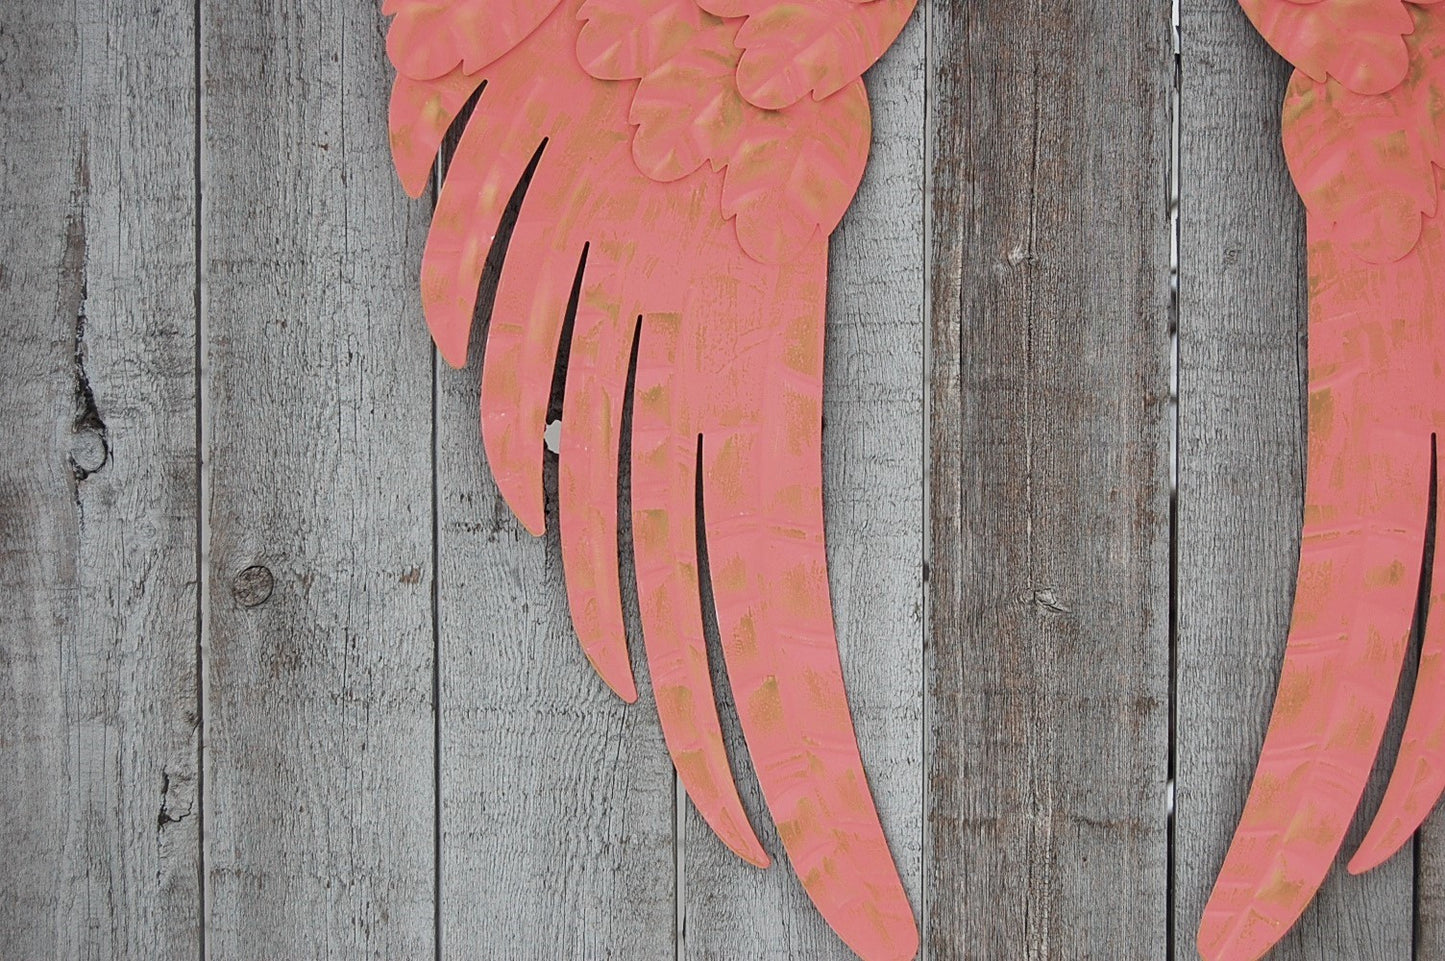 Coral & gold angel wings - The Vintage Artistry